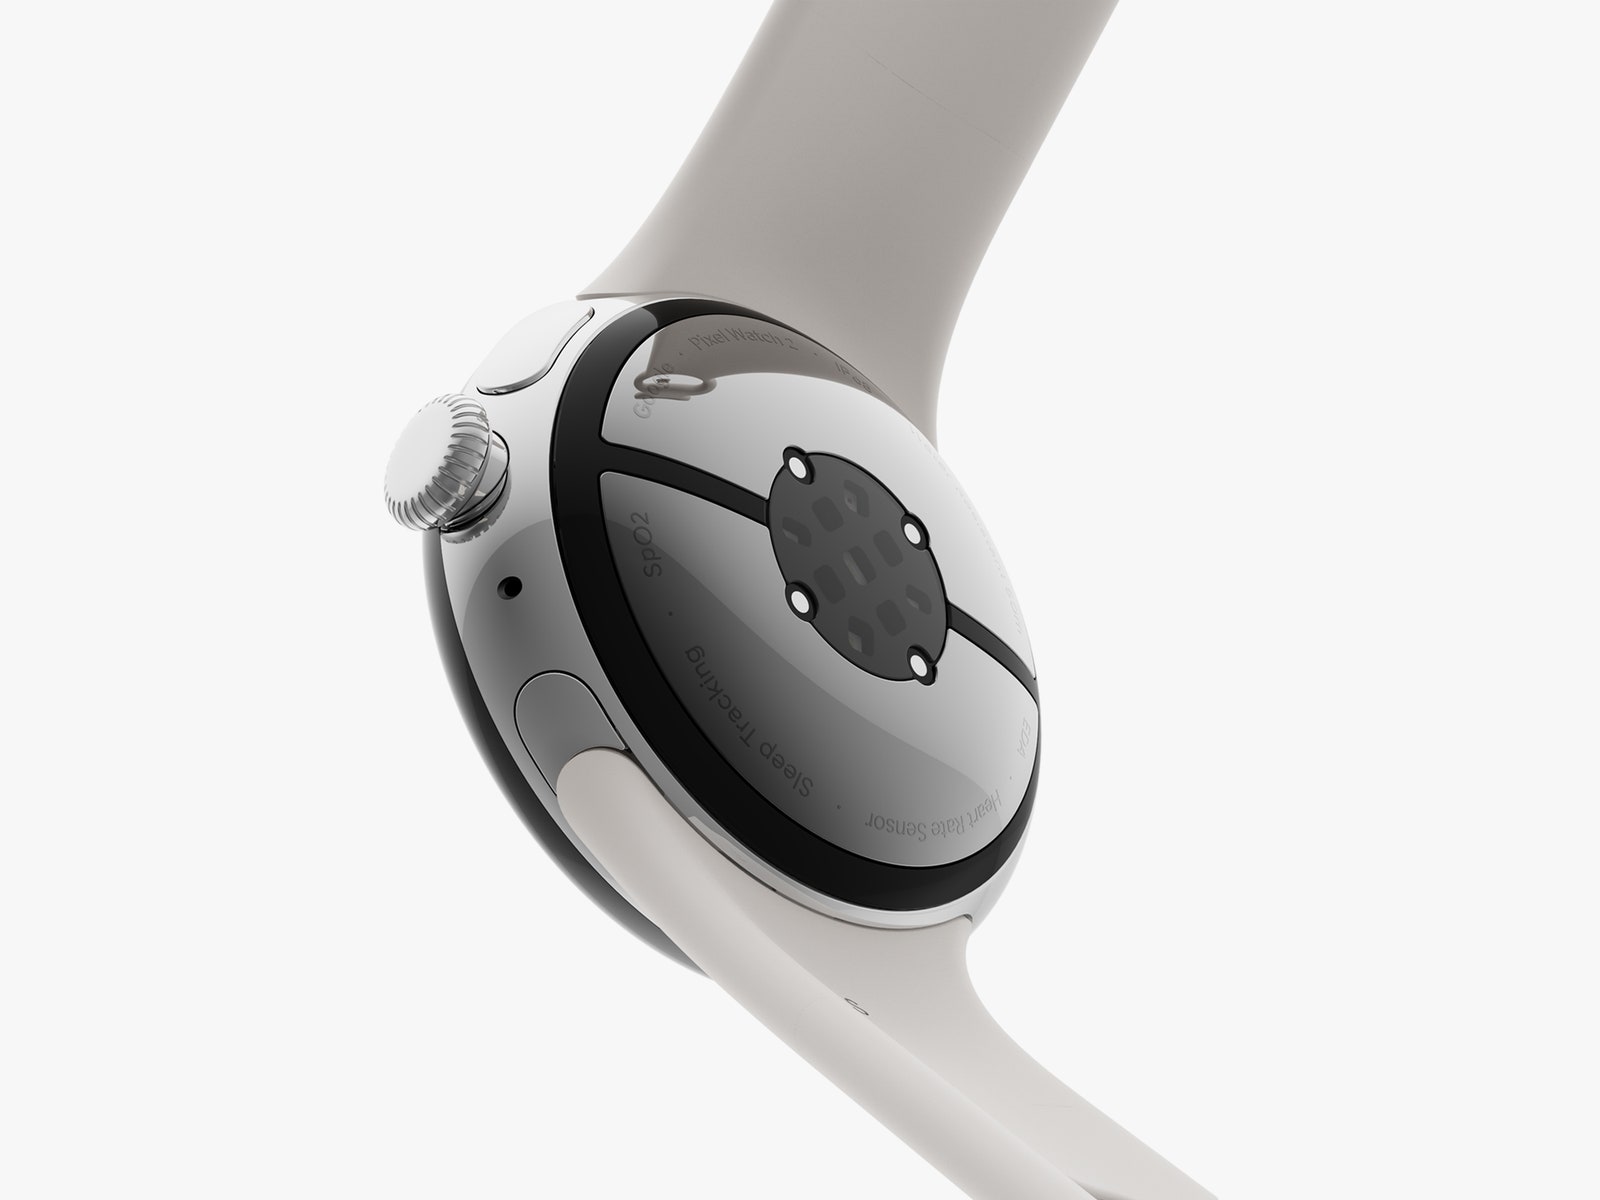 Closeup of the back glass and sensors on the Google Pixel Watch 2